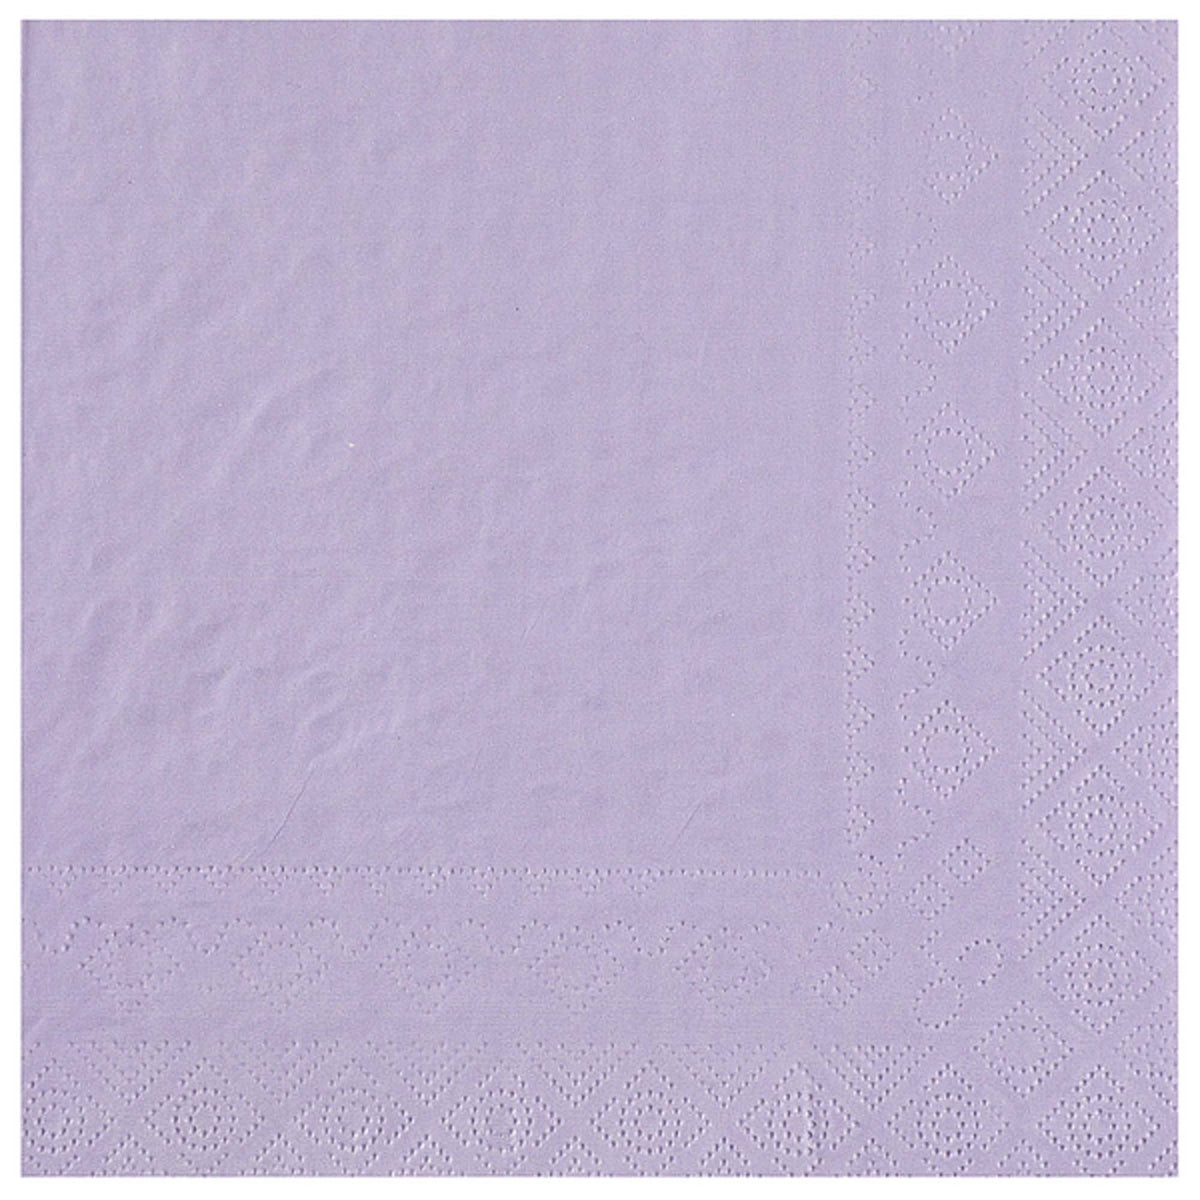 SANTEX Everyday Entertaining Violet Large Lunch Paper Party Napkins, 25 Count